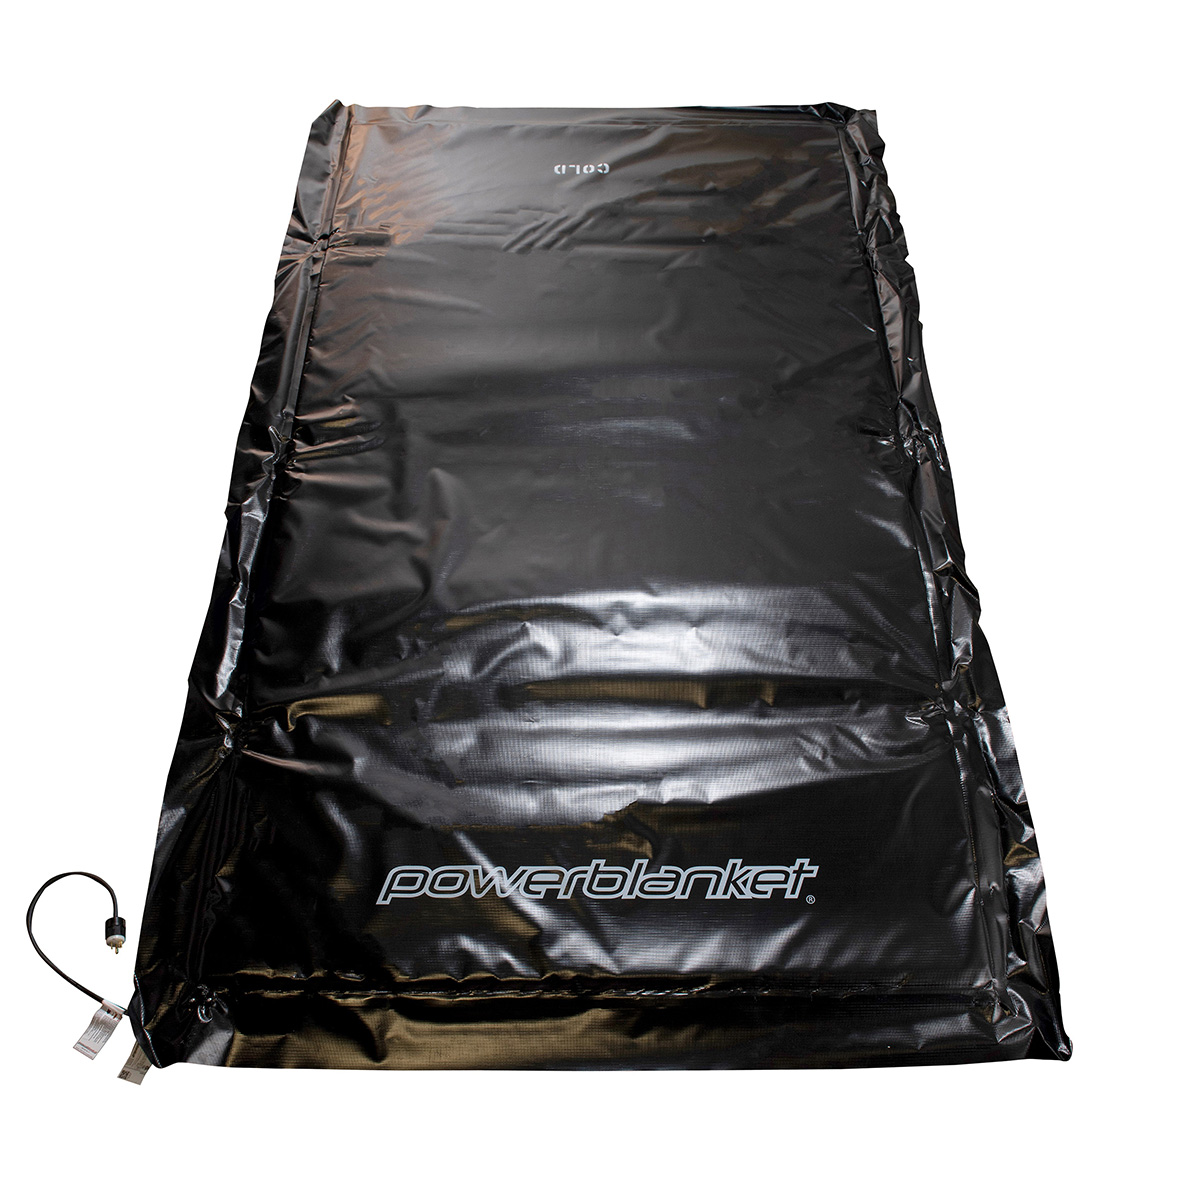 Power Blanket MD0310 Multi-Duty Electric Concrete Curing Blanket, 3' x 10